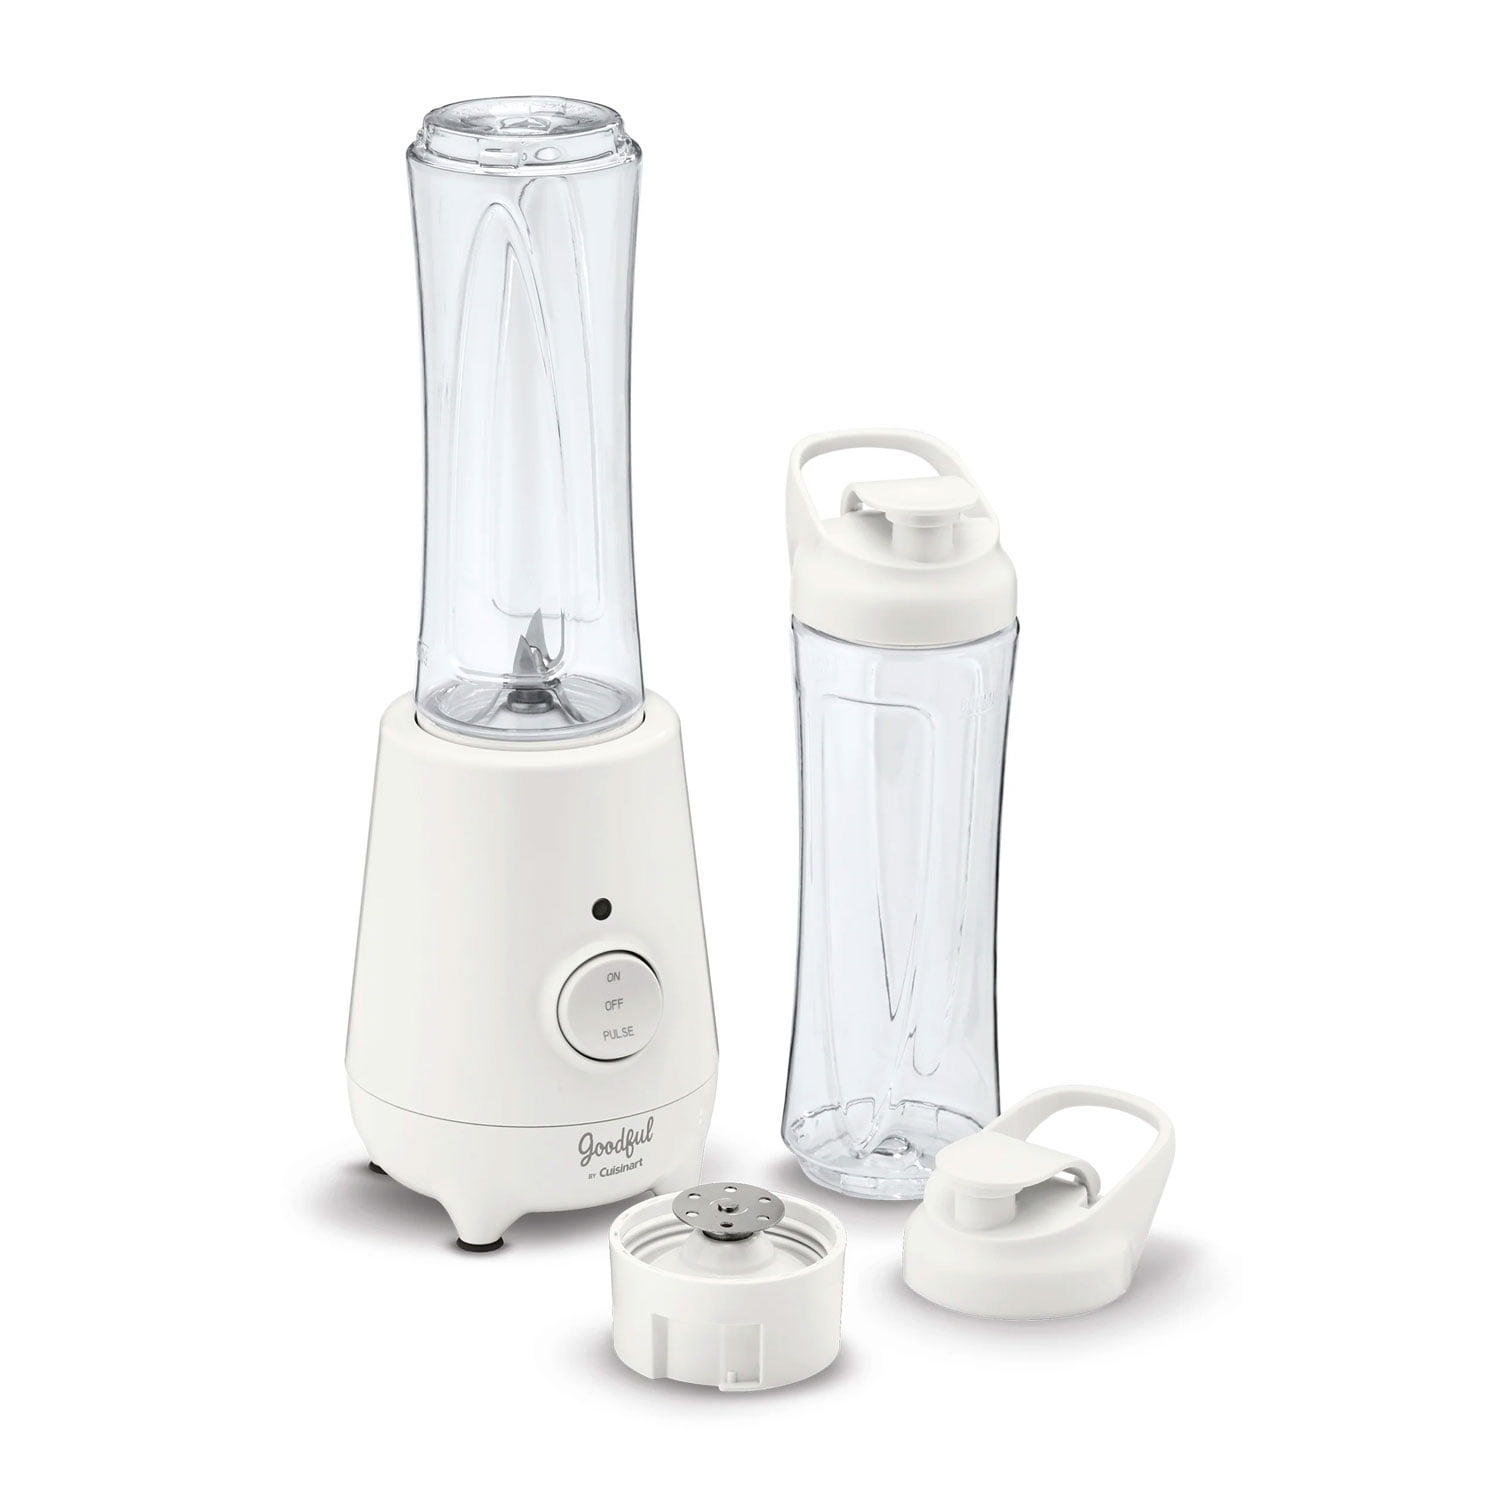 Allow us to turn you on to the most compact and reliable blender